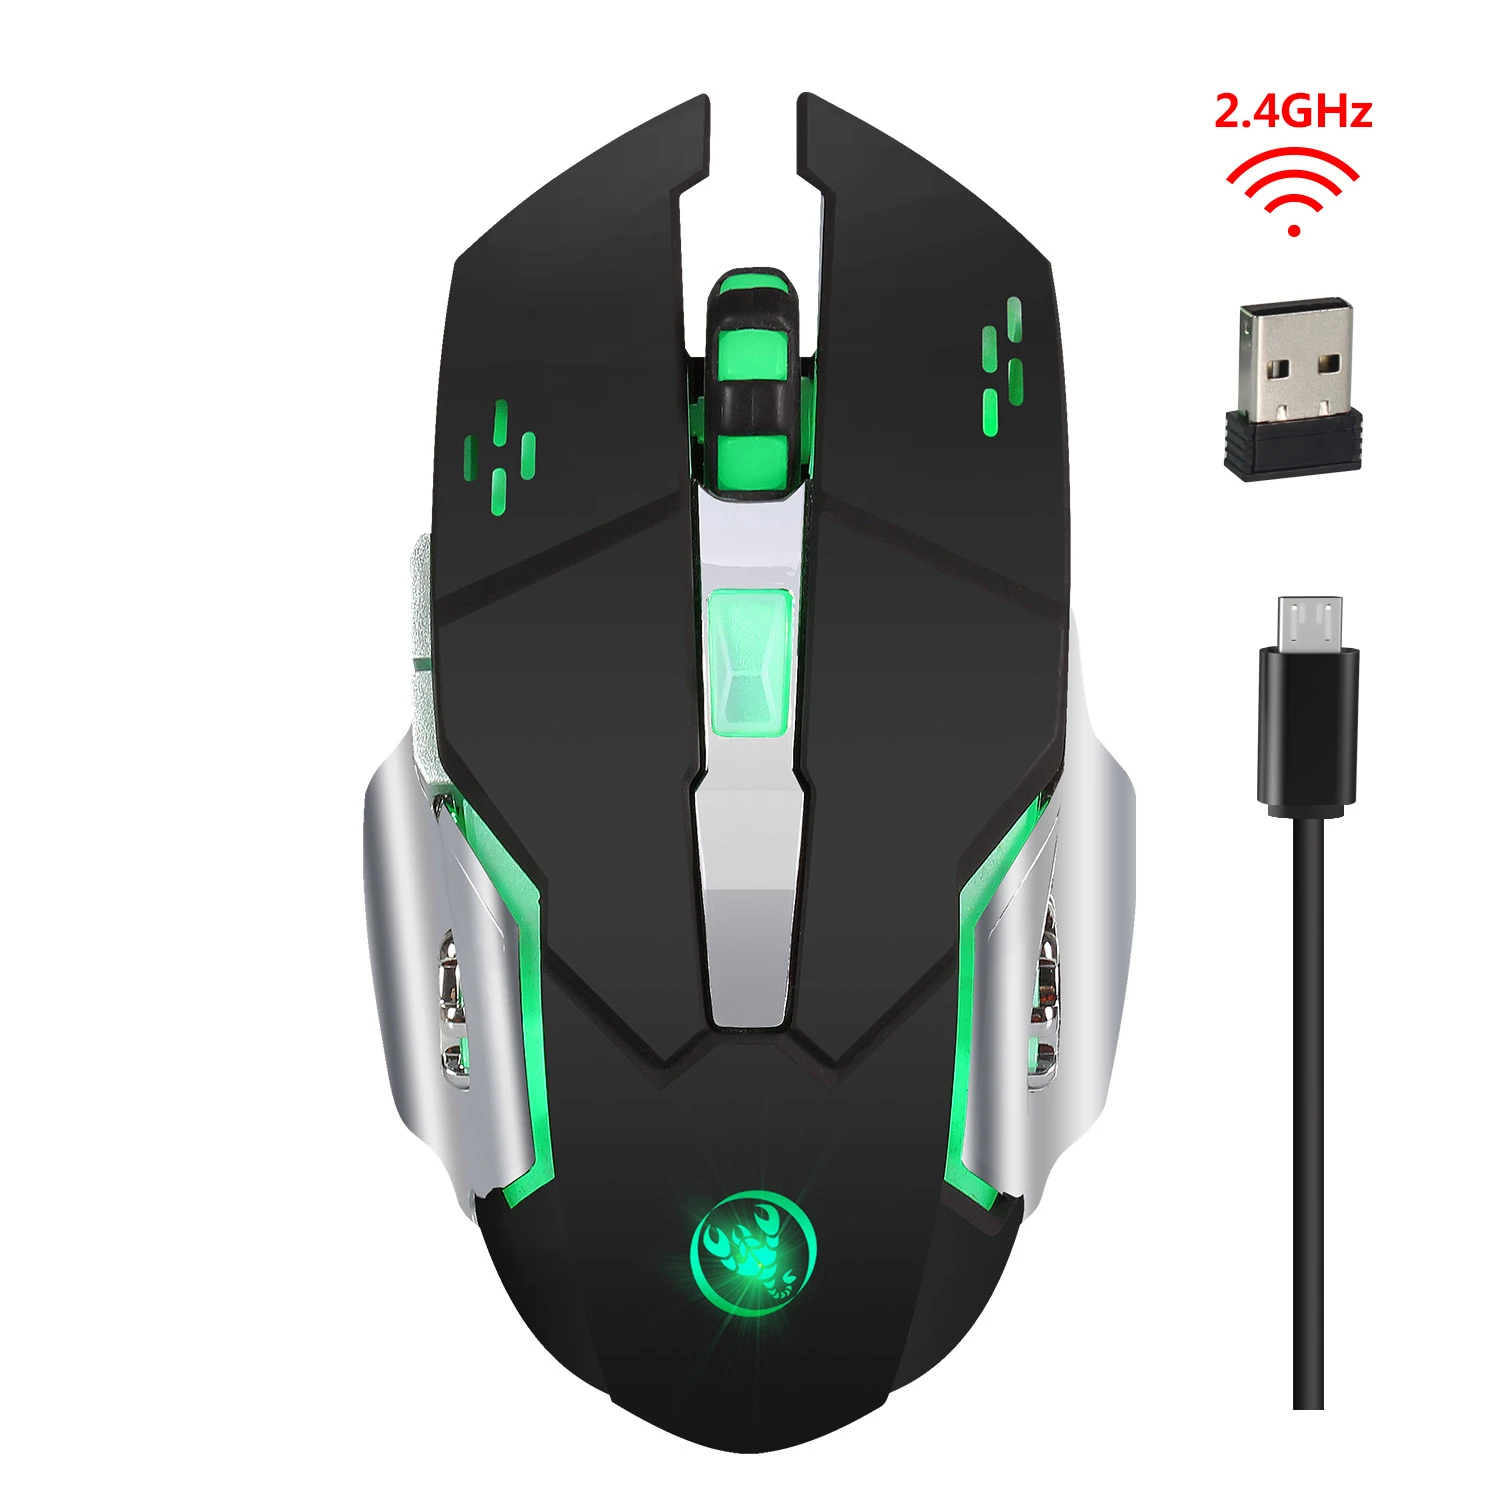 Rocketek 2.4G wireless rechargeable gaming mouse 7 color backlight adjustable 2400DPI Ergonomic Mice for PC laptop game LOL PUBG